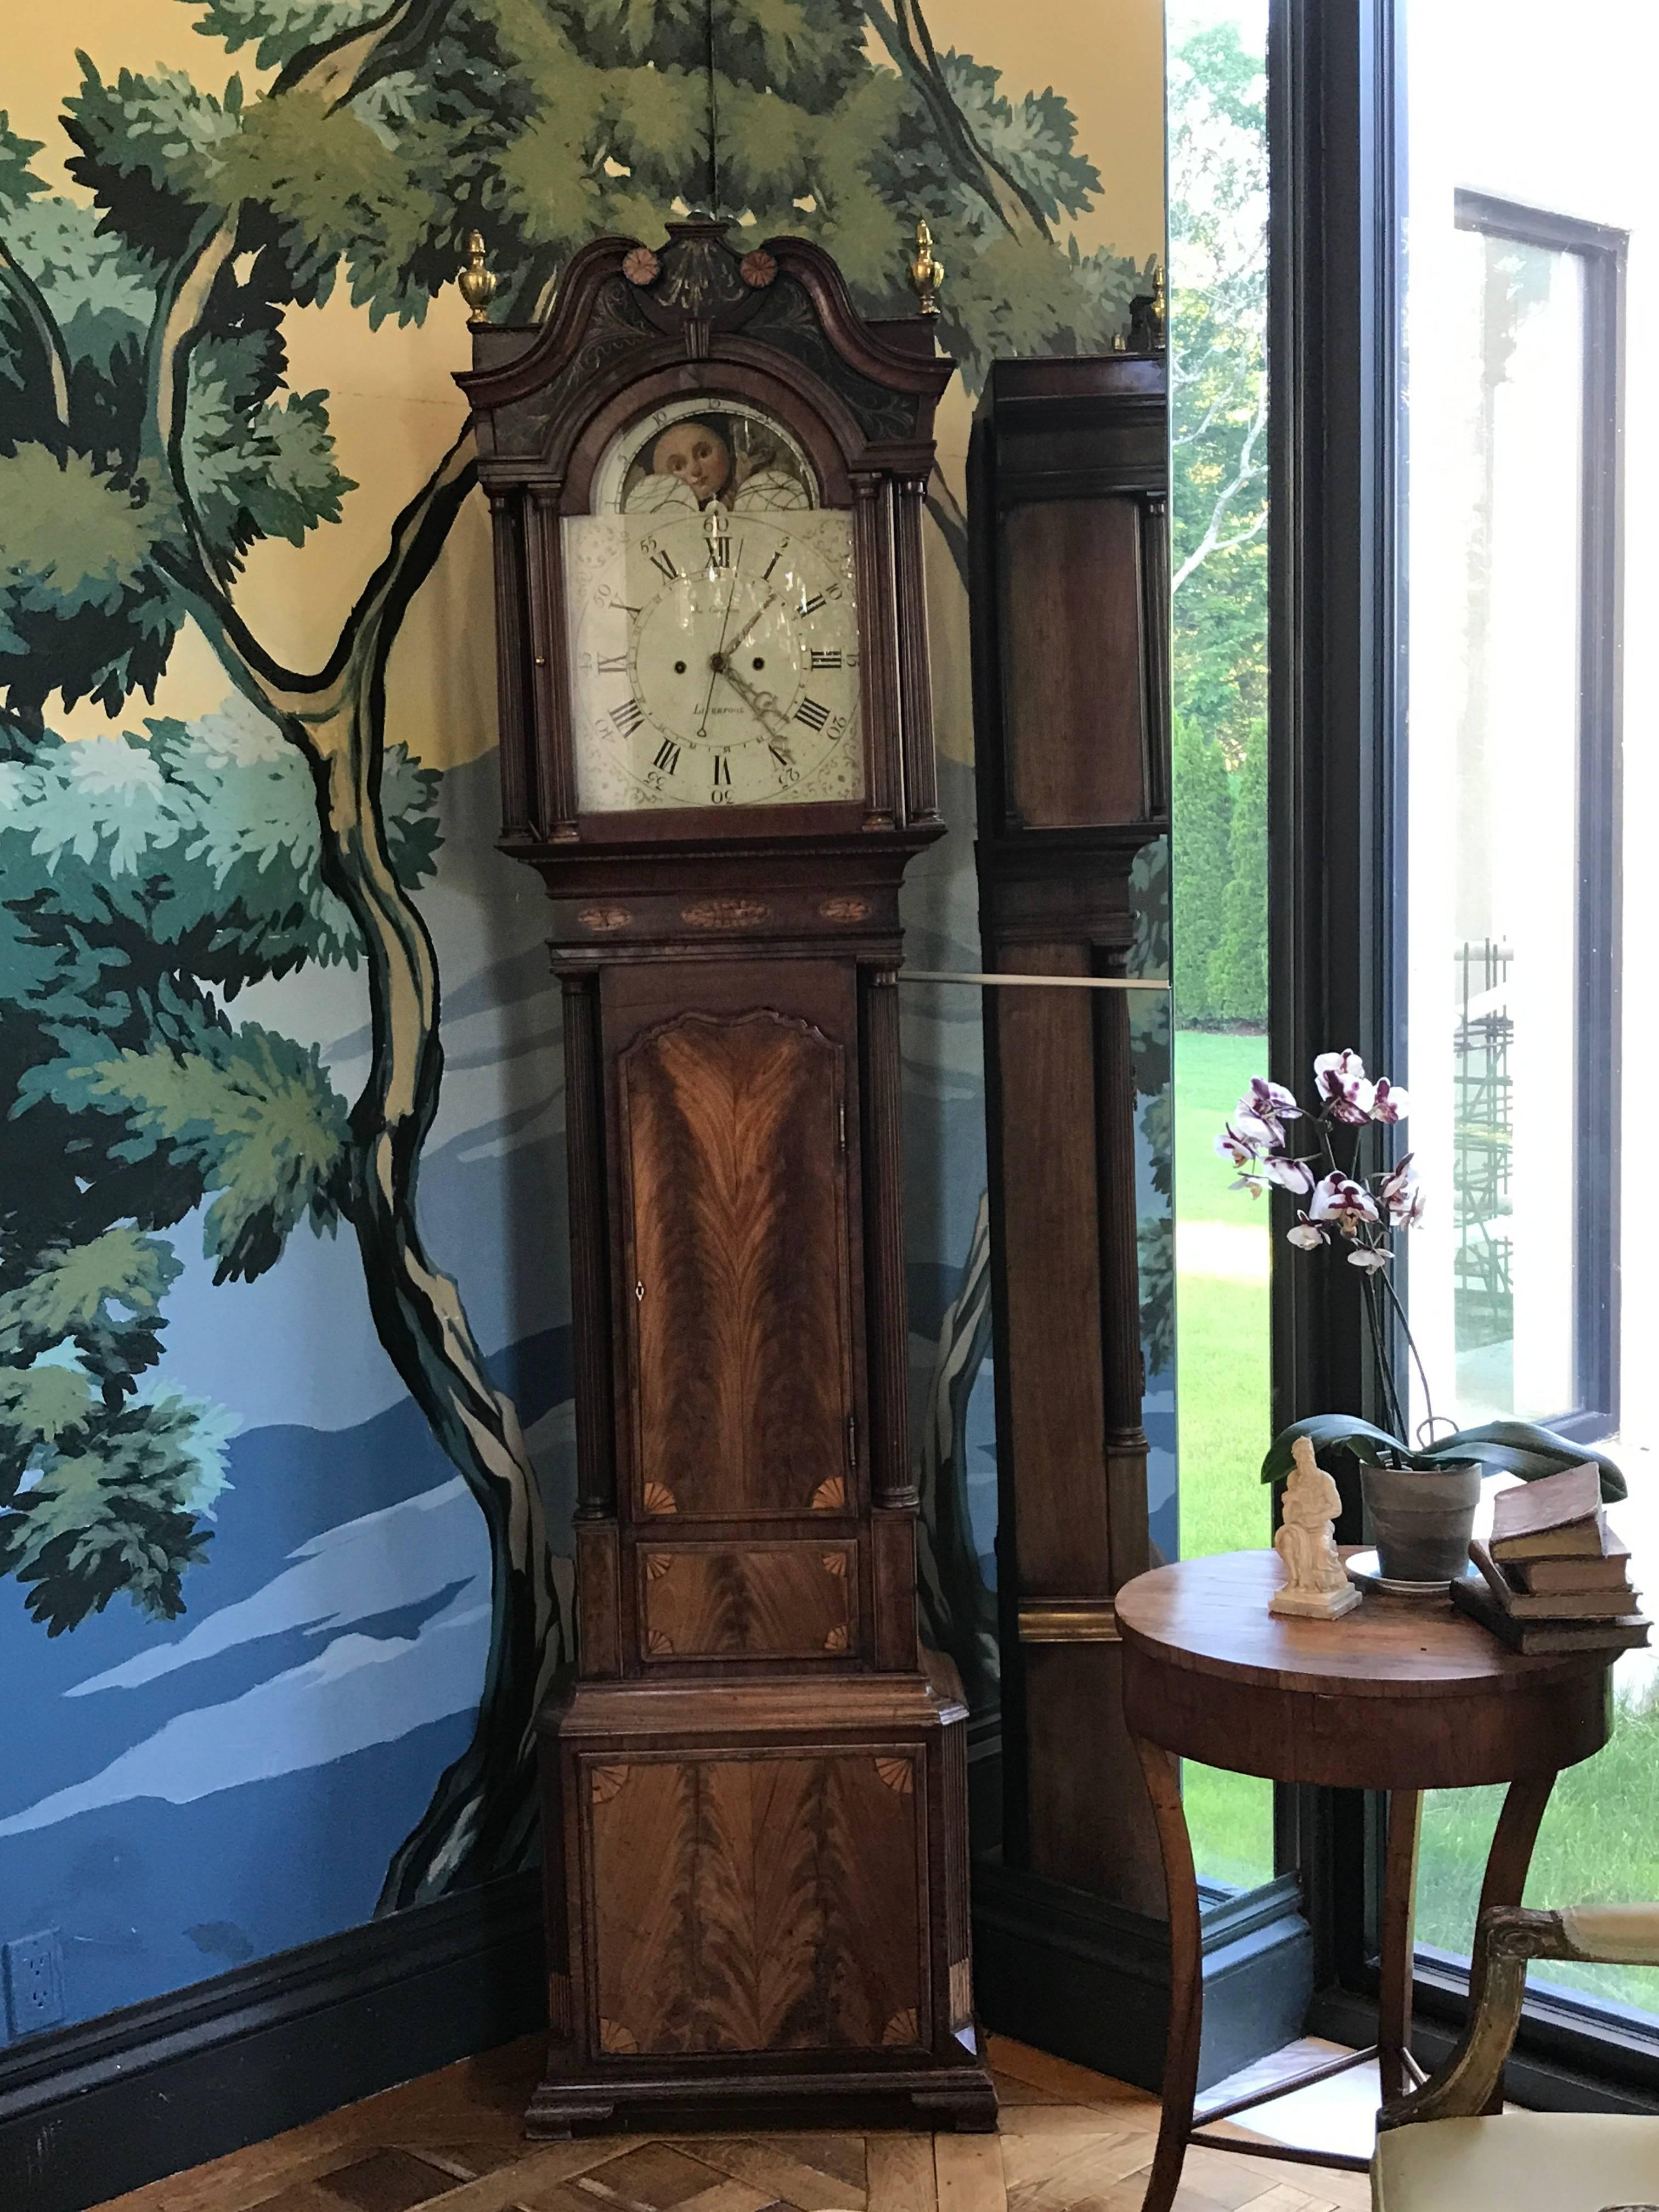 This elaborately decorated tall case clock, dating from the mid-18th century by Clockmaker James Cawson from Liverpool, has all the bells and whistles the Chippendale period has to offer.
The case is made of bookmatched mahogany with contrasting